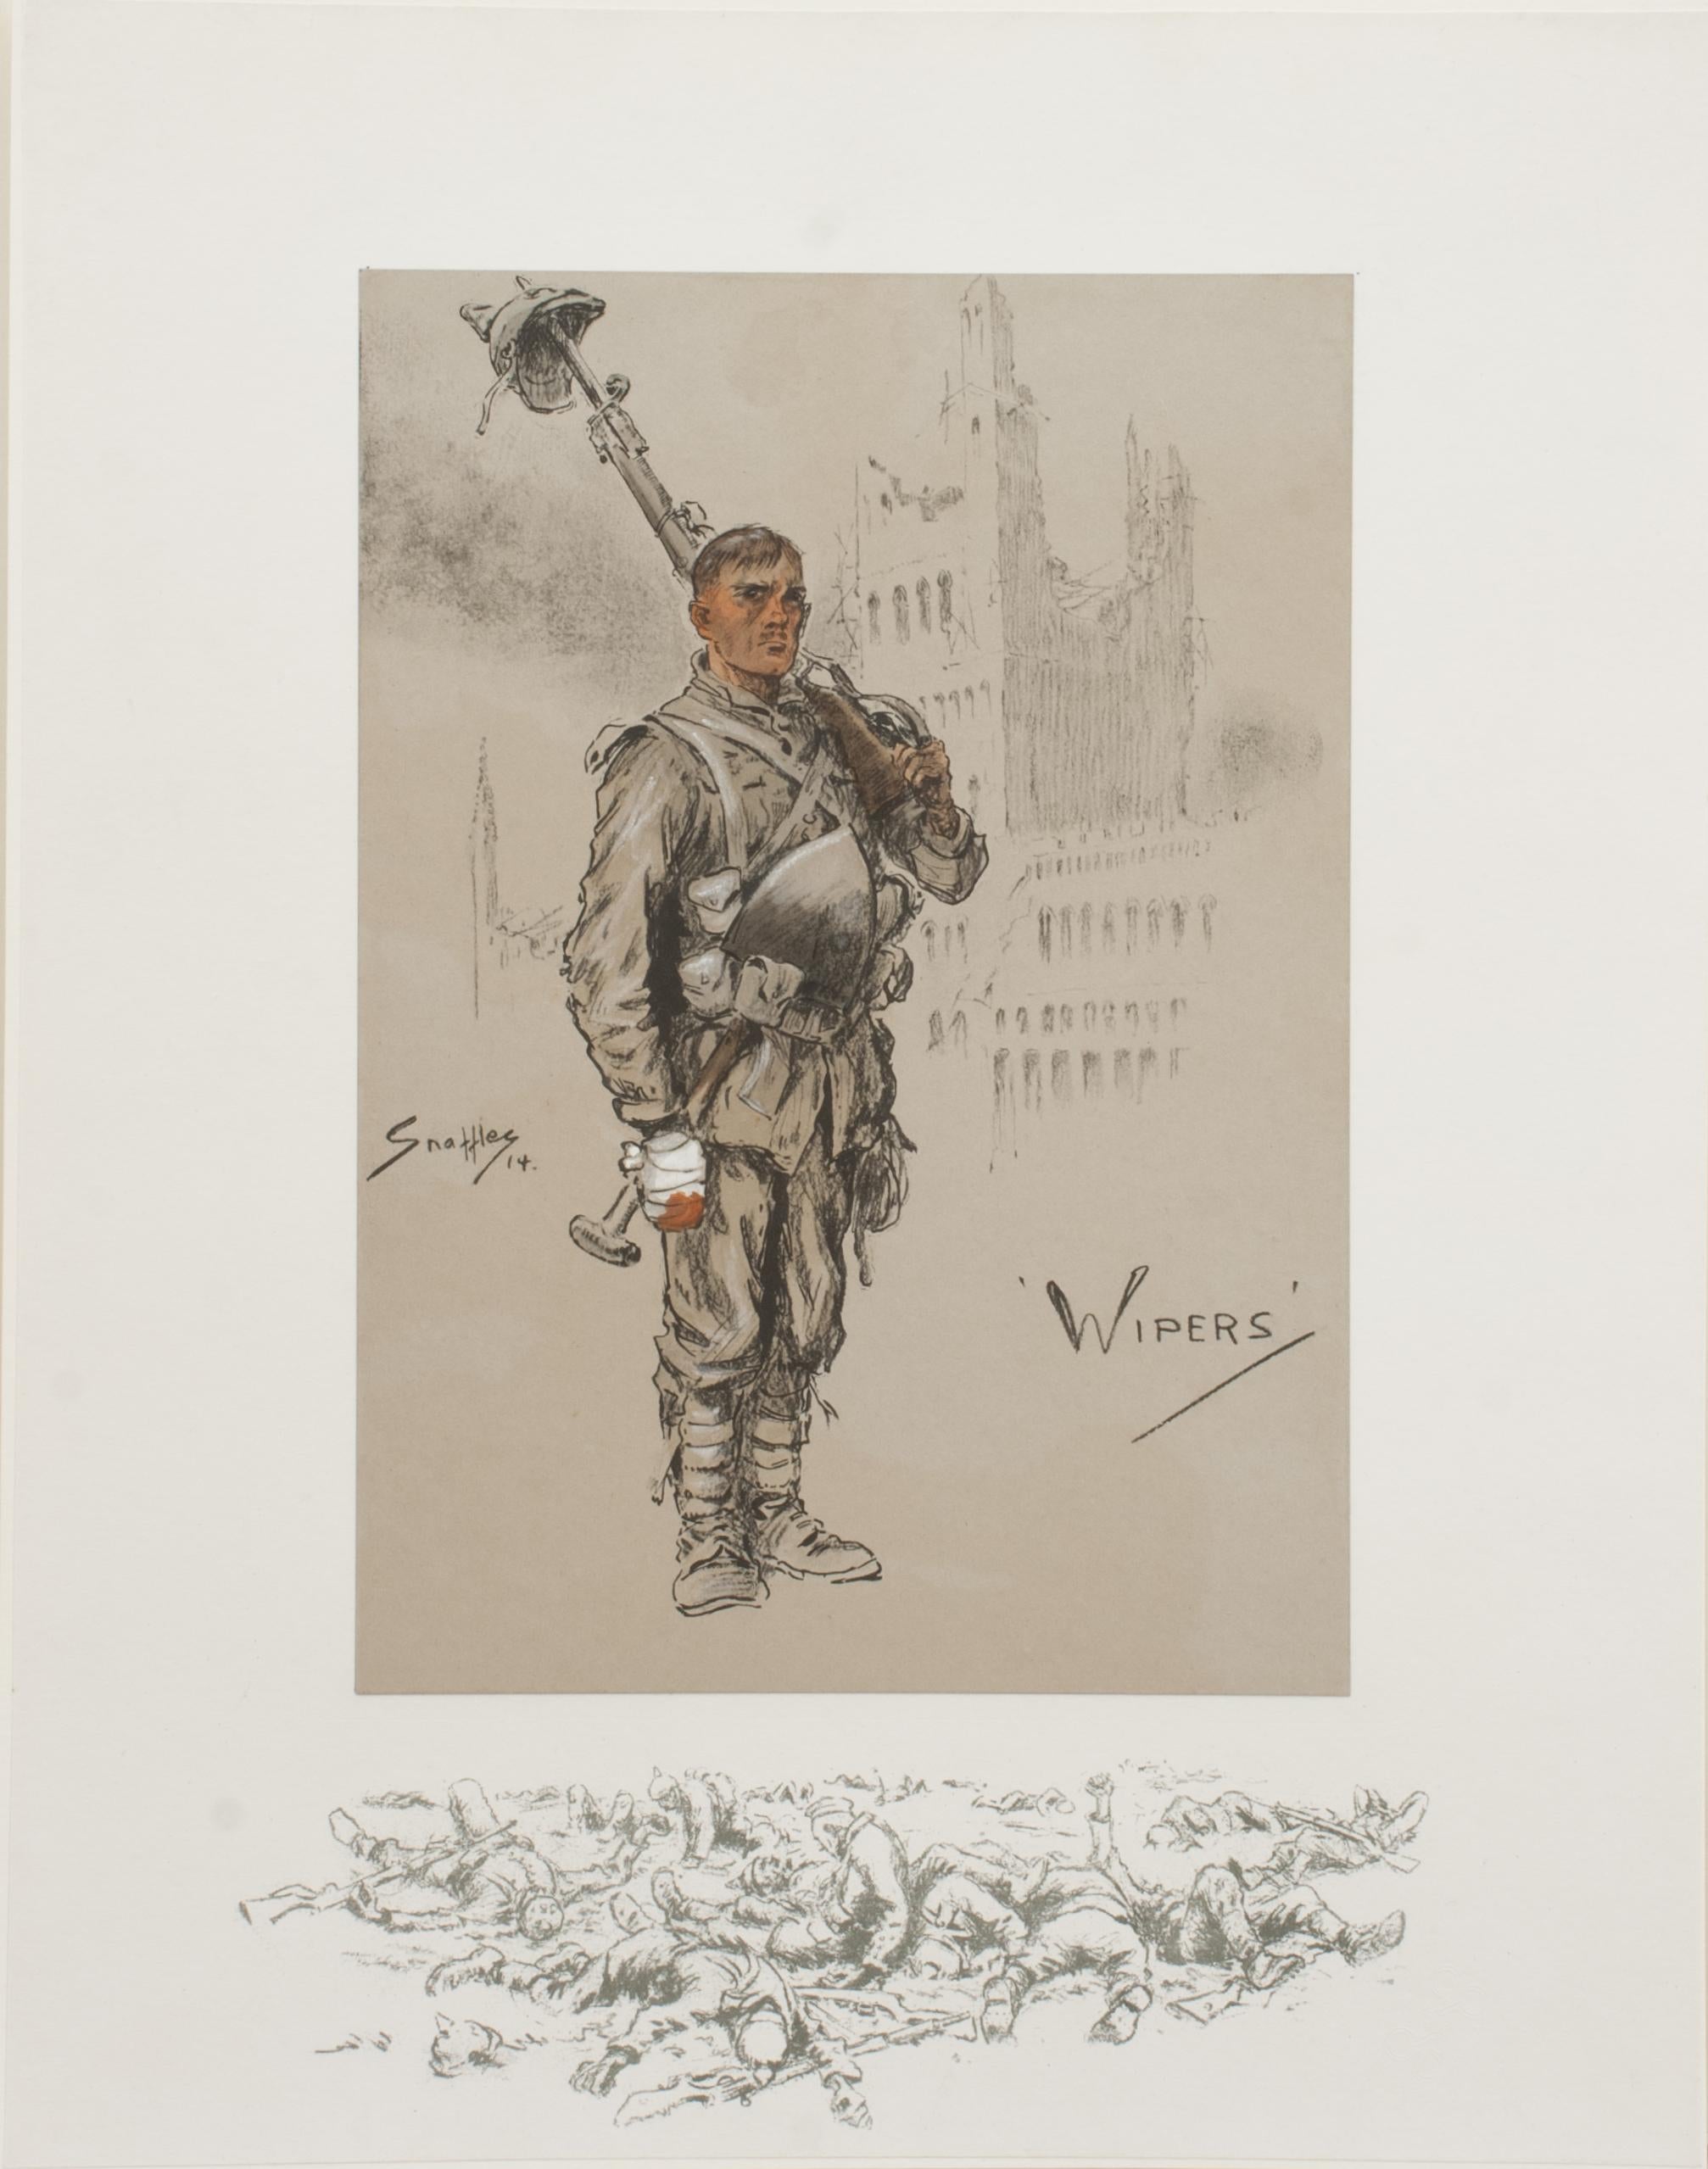 Vintage Snaffles First World War Print, Wipers.
A good Snaffles WWI military print entitled 'Wipers'. The main center colour-piece hand coloured lithograph is mounted onto the printed remarque board. The Snaffles lithograph shows a wounded soldier